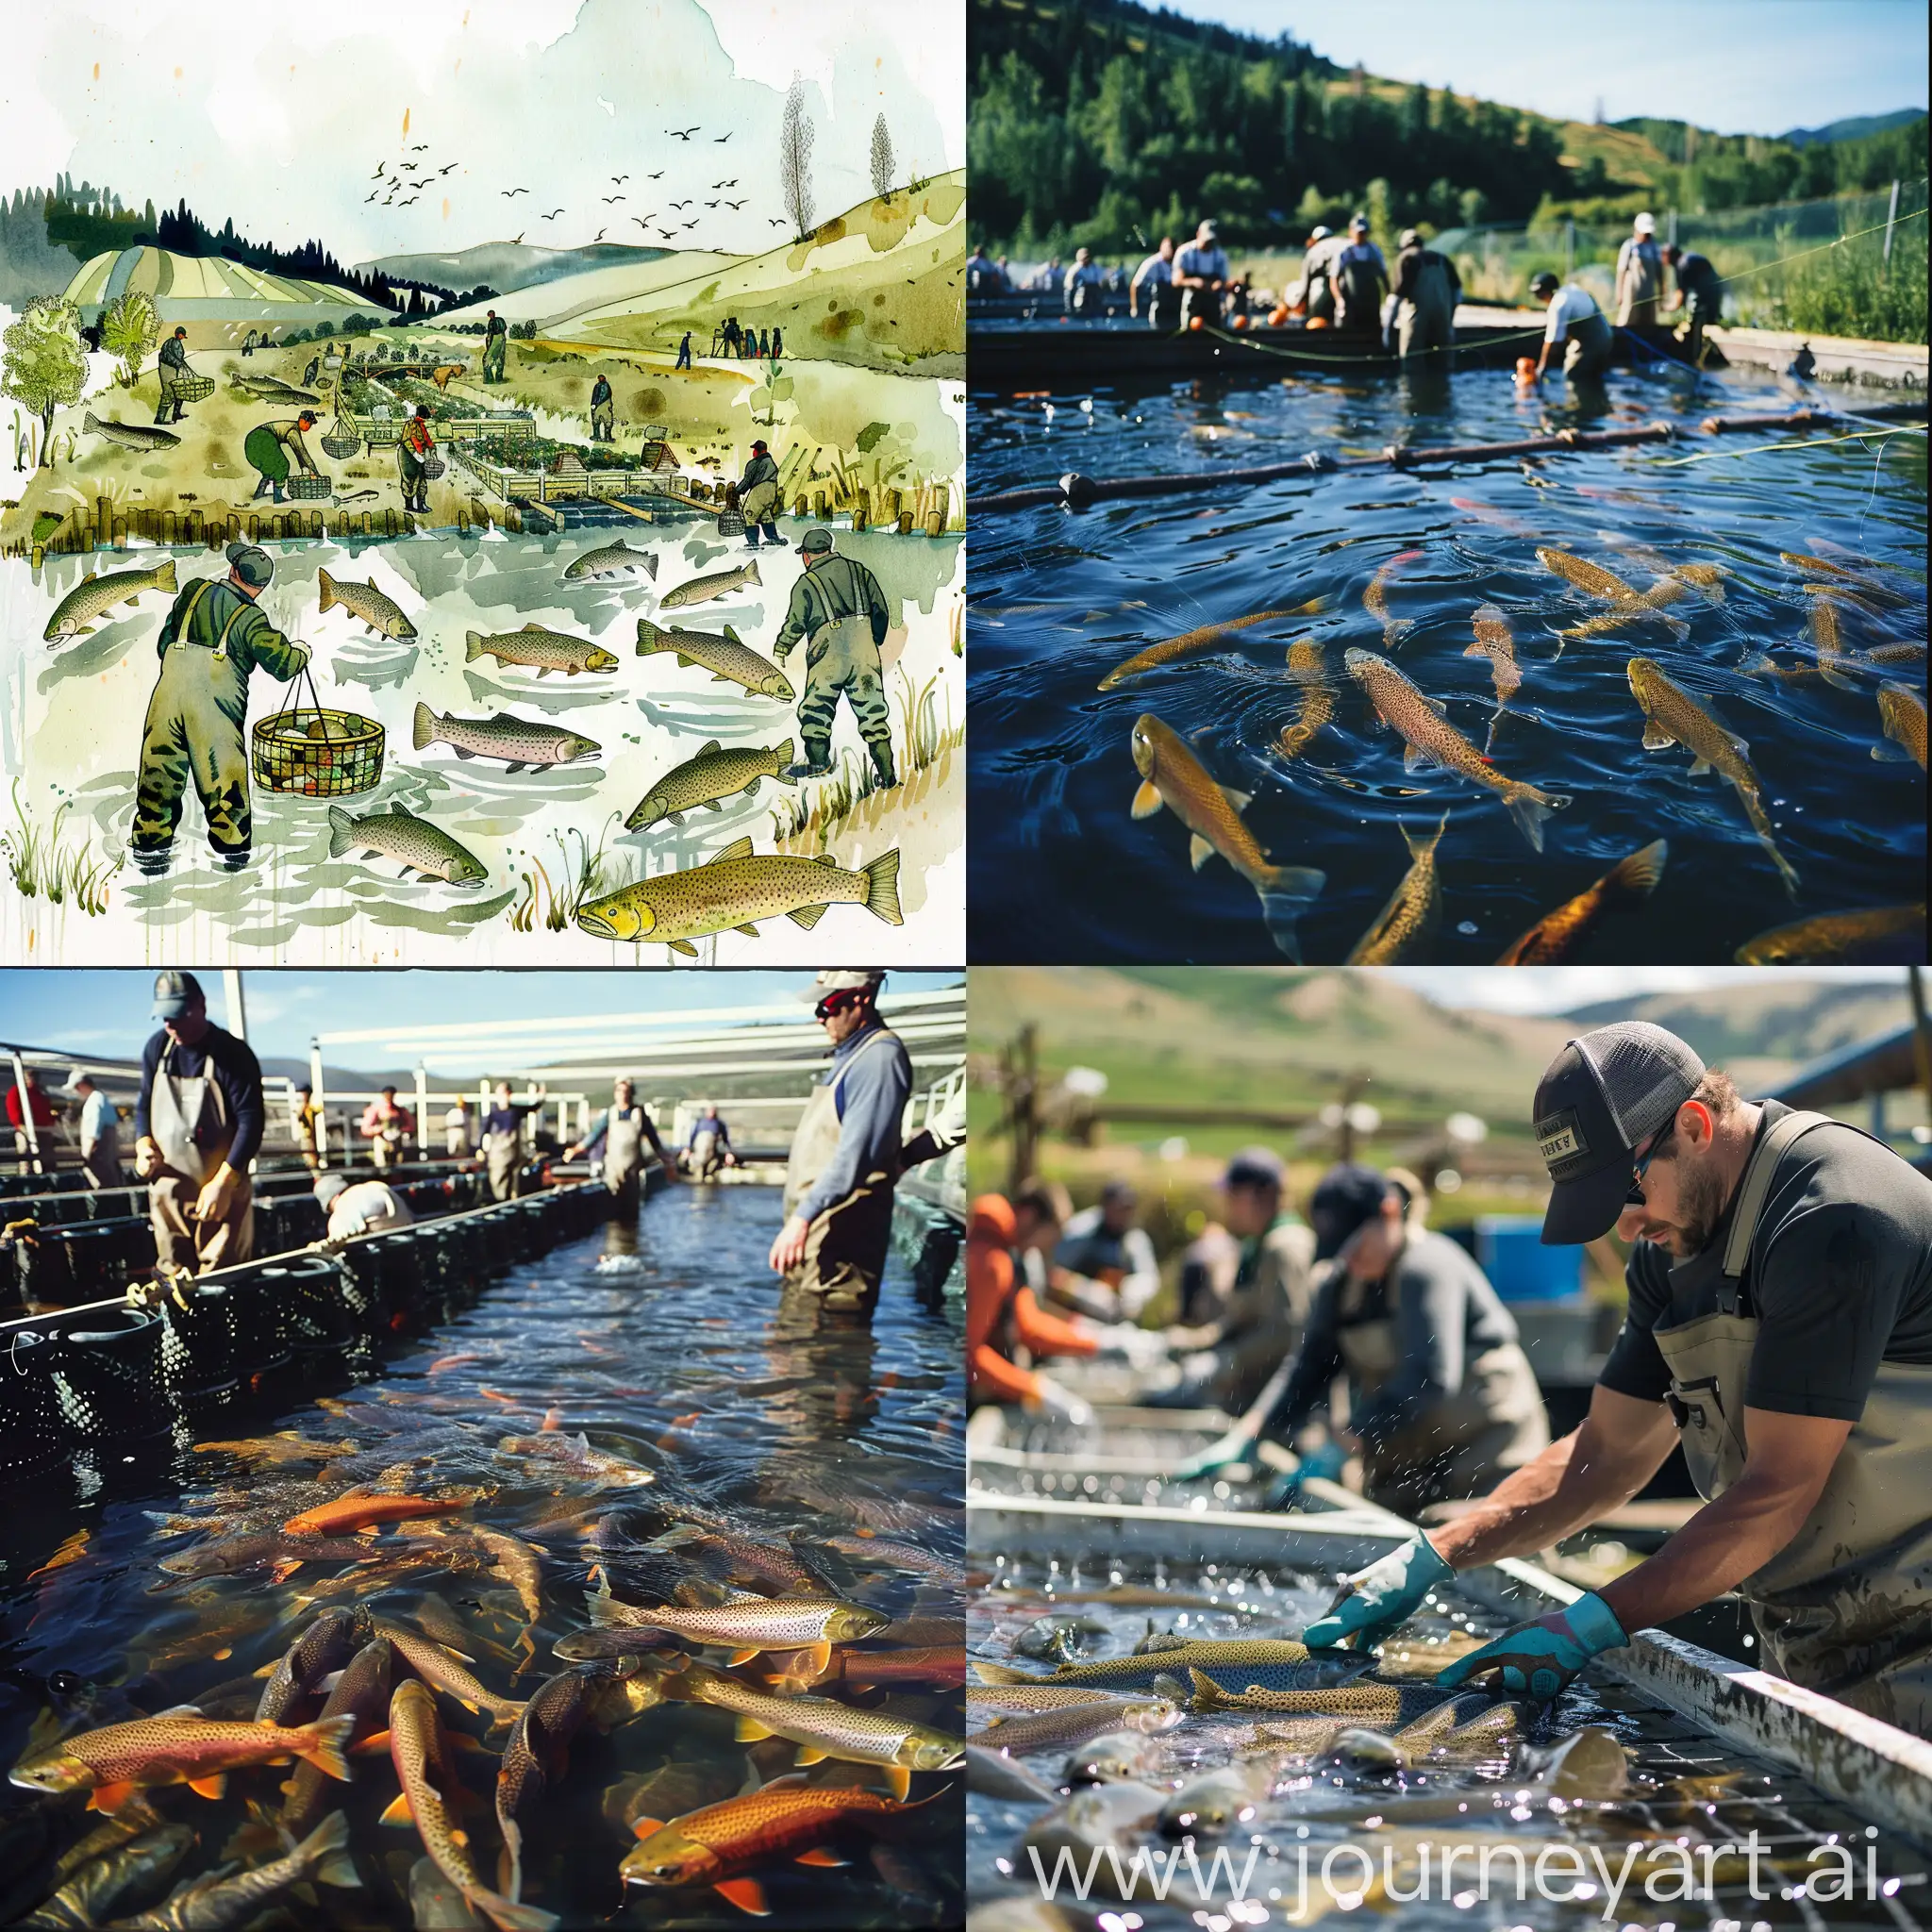 modern trout farming, people around